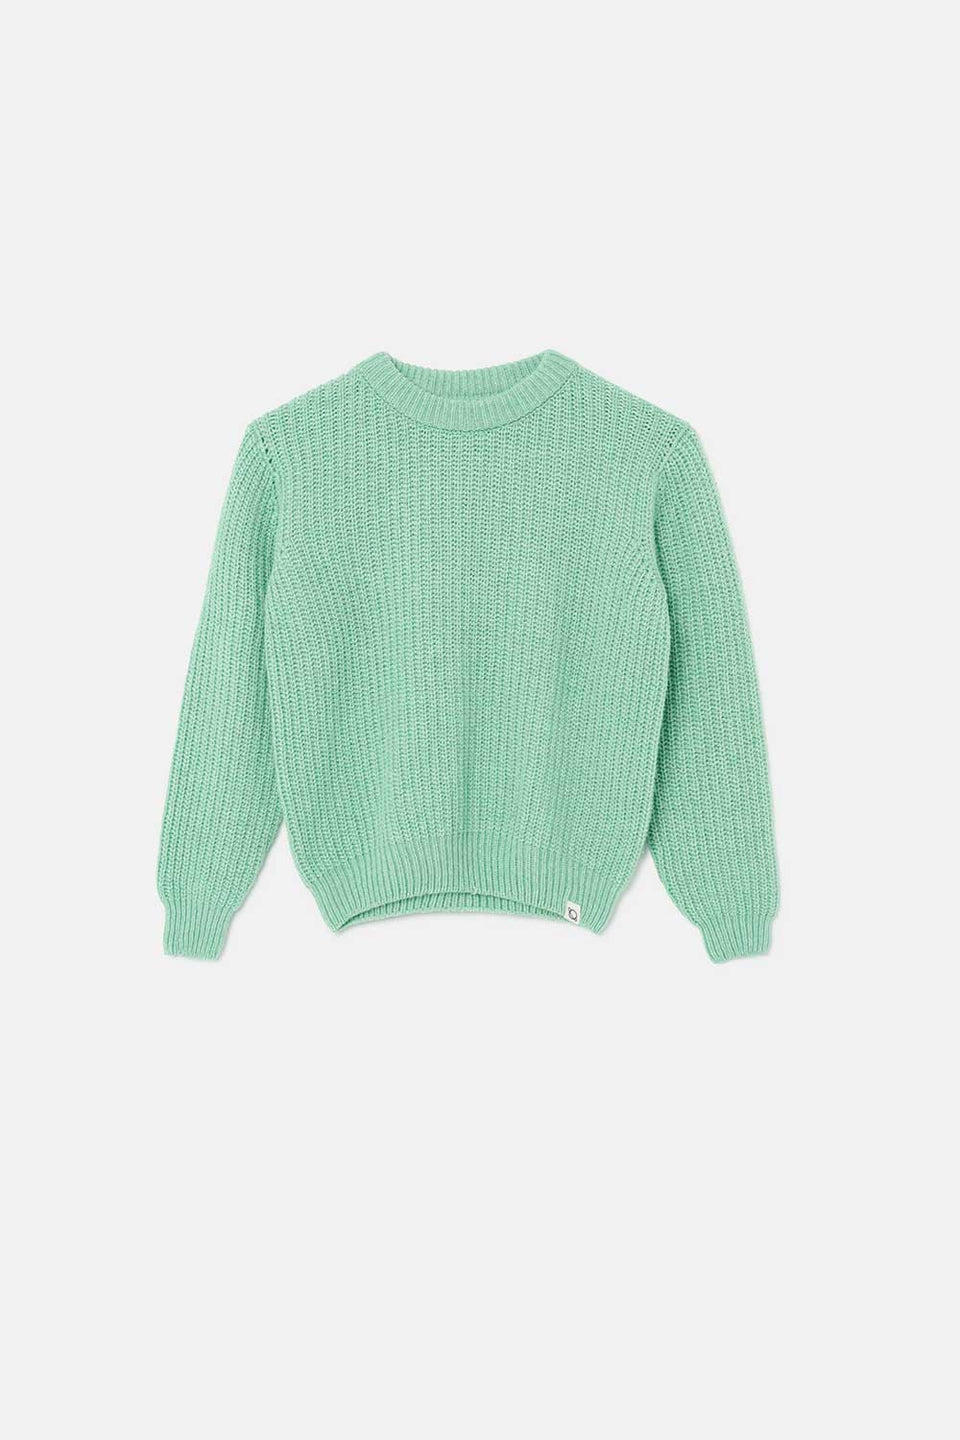 My Little Cozmo Soft Tricot Sweater - Green